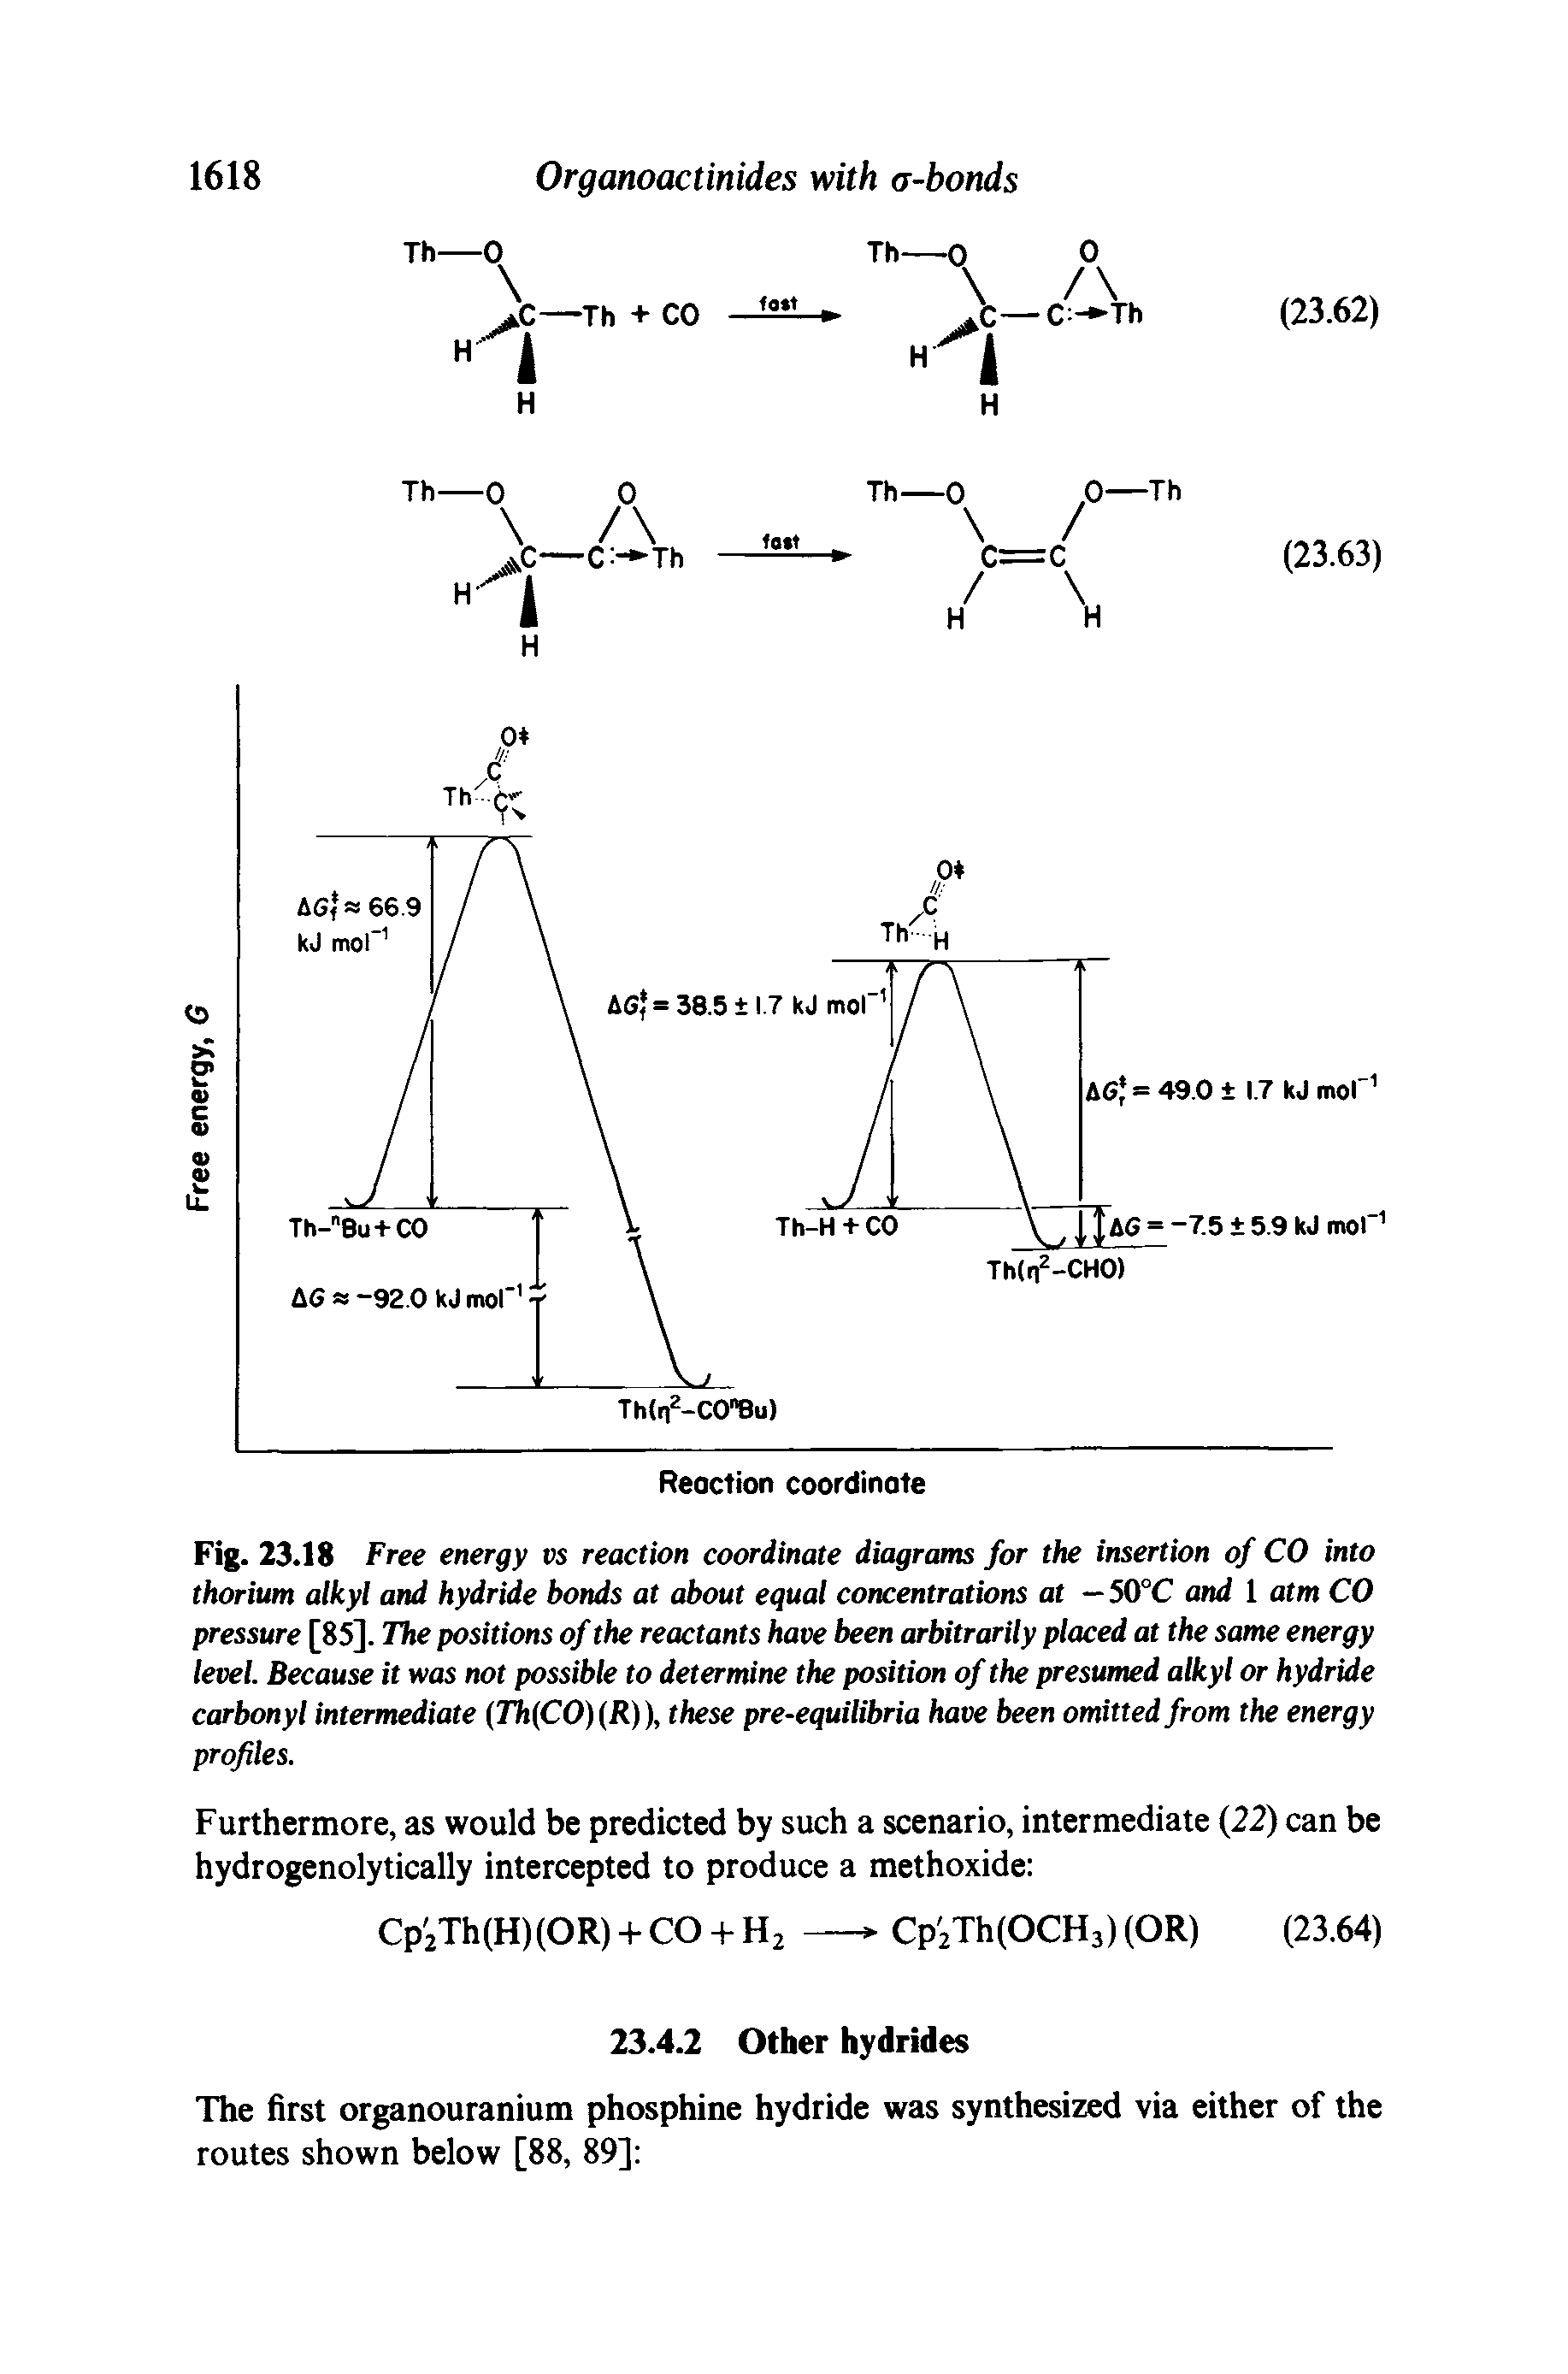 Fig. 23.18 Free energy vs reaction coordinate diagrams for the insertion of CO into thorium alkyl and hydride bonds at about equal concentrations at — S0°C and 1 atm CO pressure [85]. The positions of the reactants have been arbitrarily placed at the same energy level. Because it was not possible to determine the position of the presumed aUcyl or hydride carbonyl intermediate (Th(CO)(R)), these pre-equilibria have been omitted from the energy profiles.